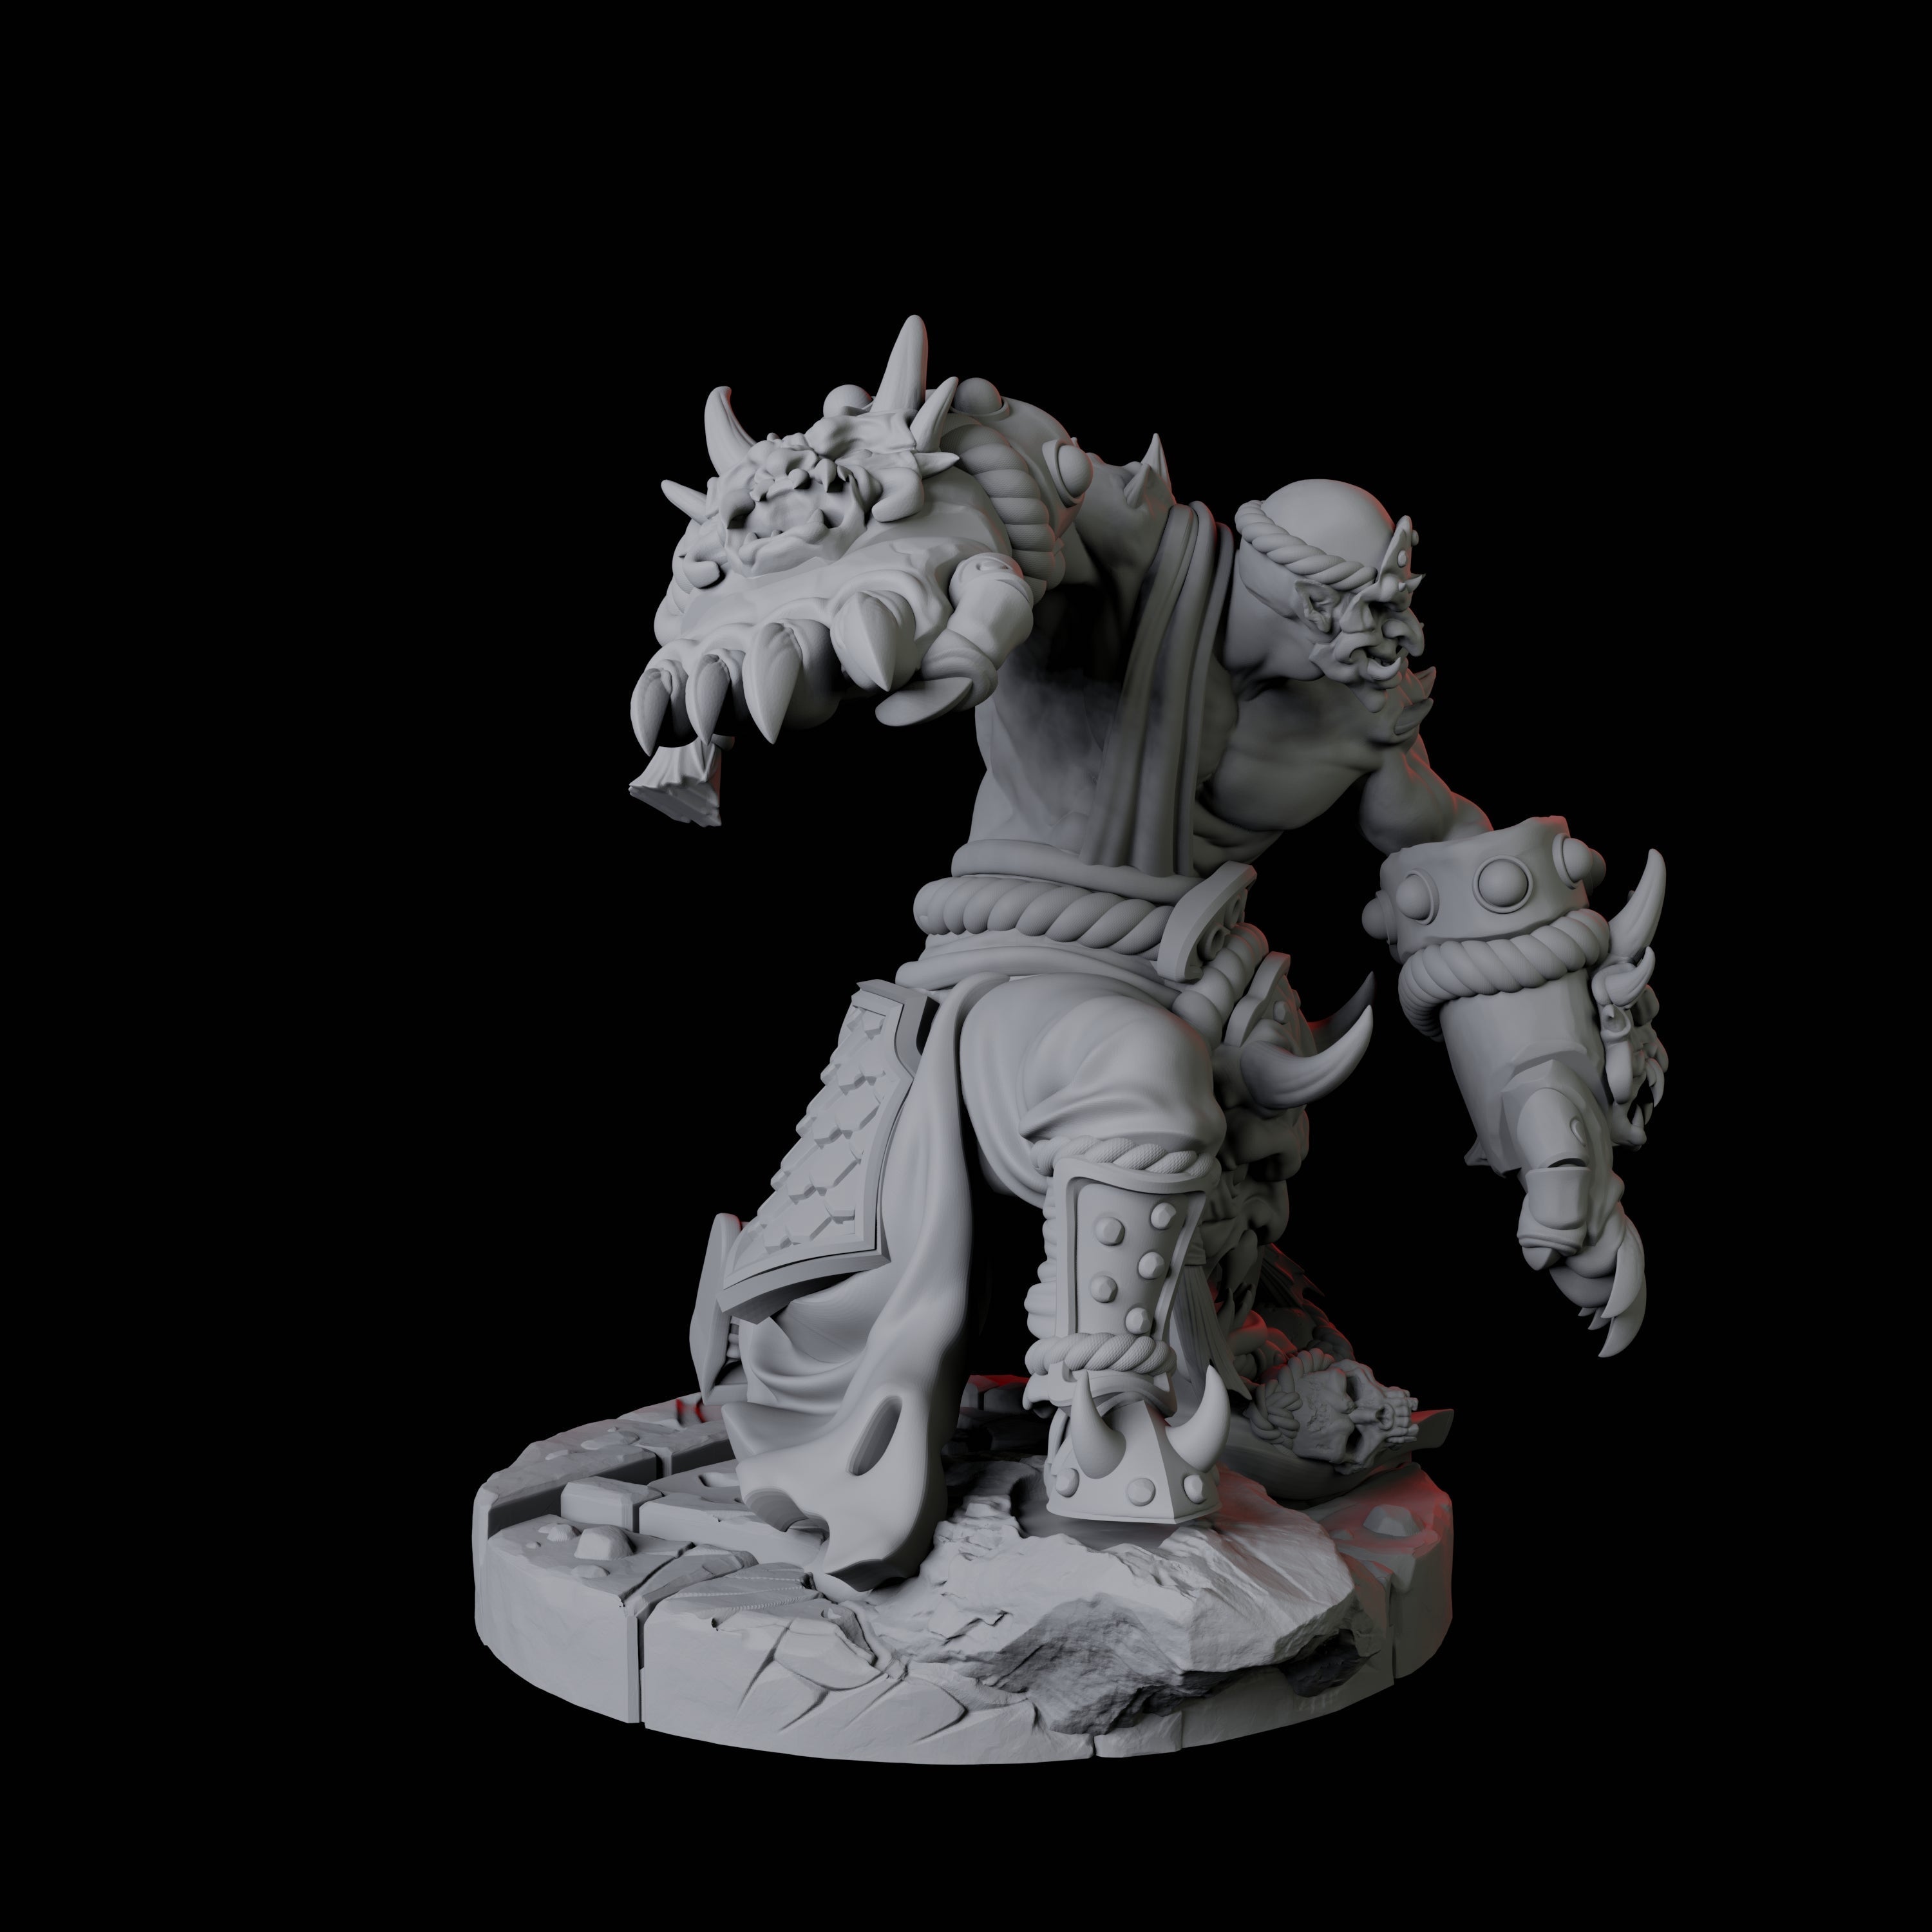 Masked Bearded Devil C Miniature for Dungeons and Dragons, Pathfinder or other TTRPGs